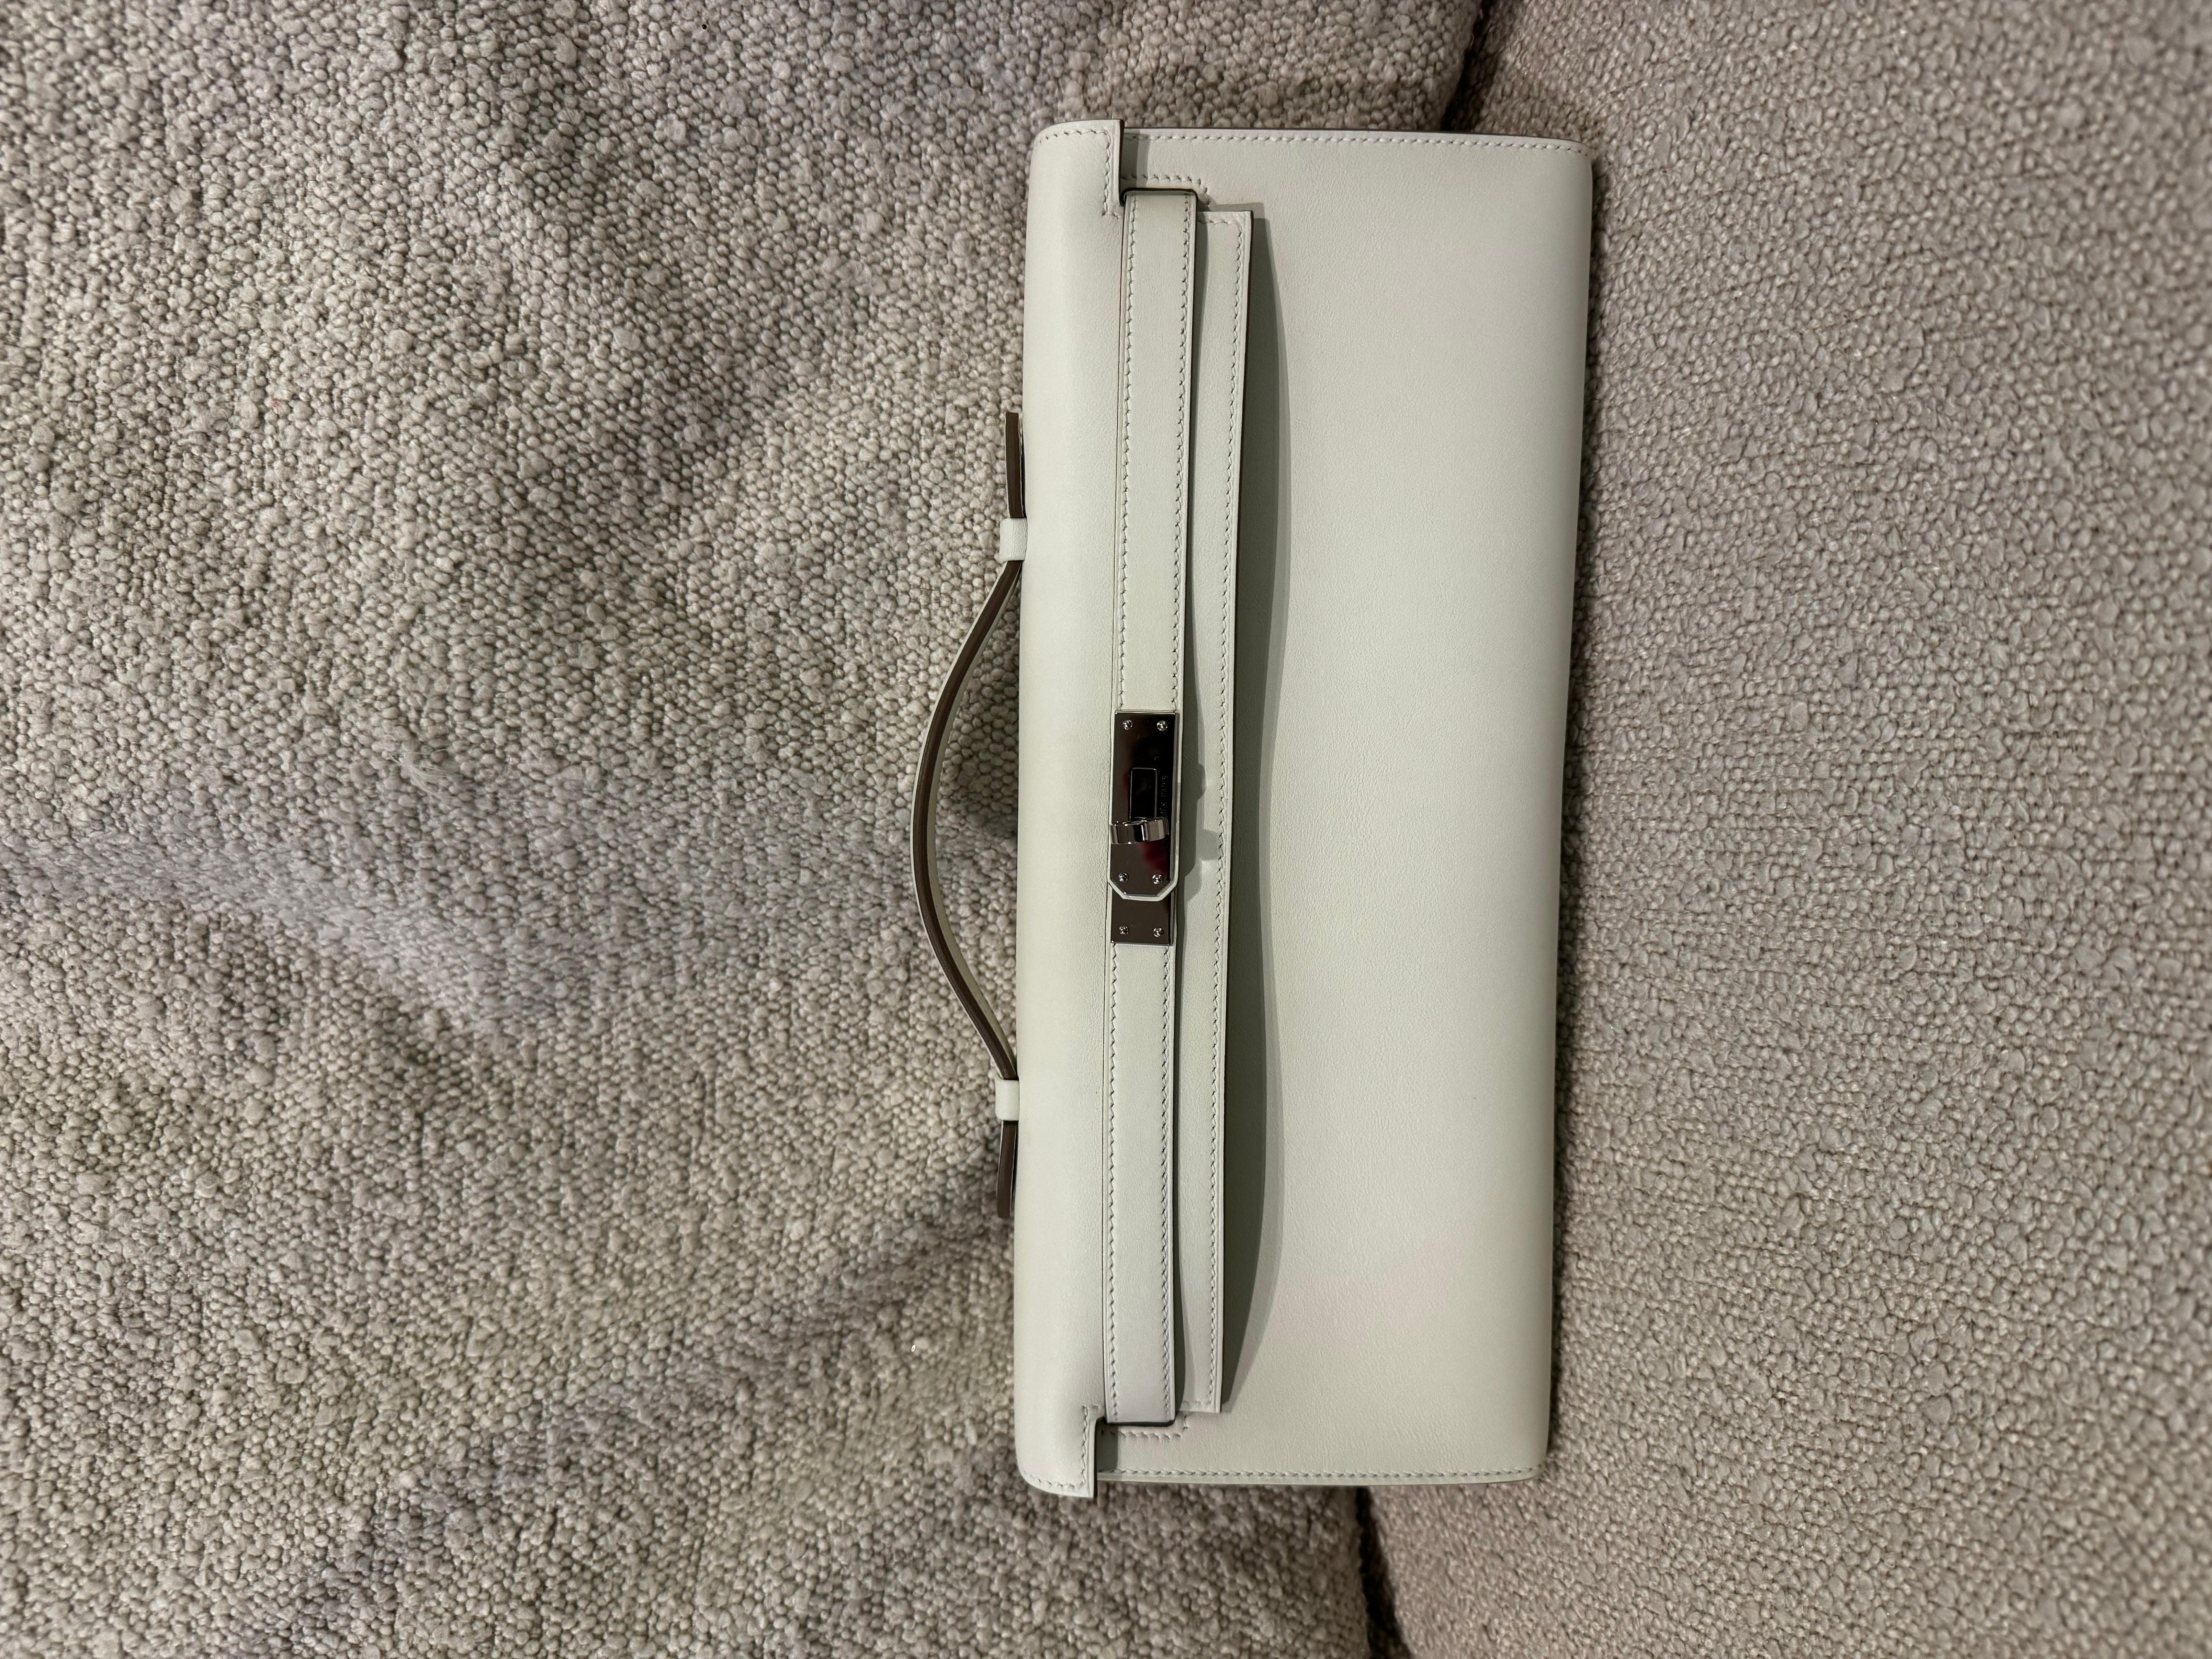 Hermes Kelly cut craie swift palladium hardware clutch bag. Comes with dustbag and box. The most classy and elegant day and night clutch. It can be carried via its top handles or worn under the arms. Purchased 2023.